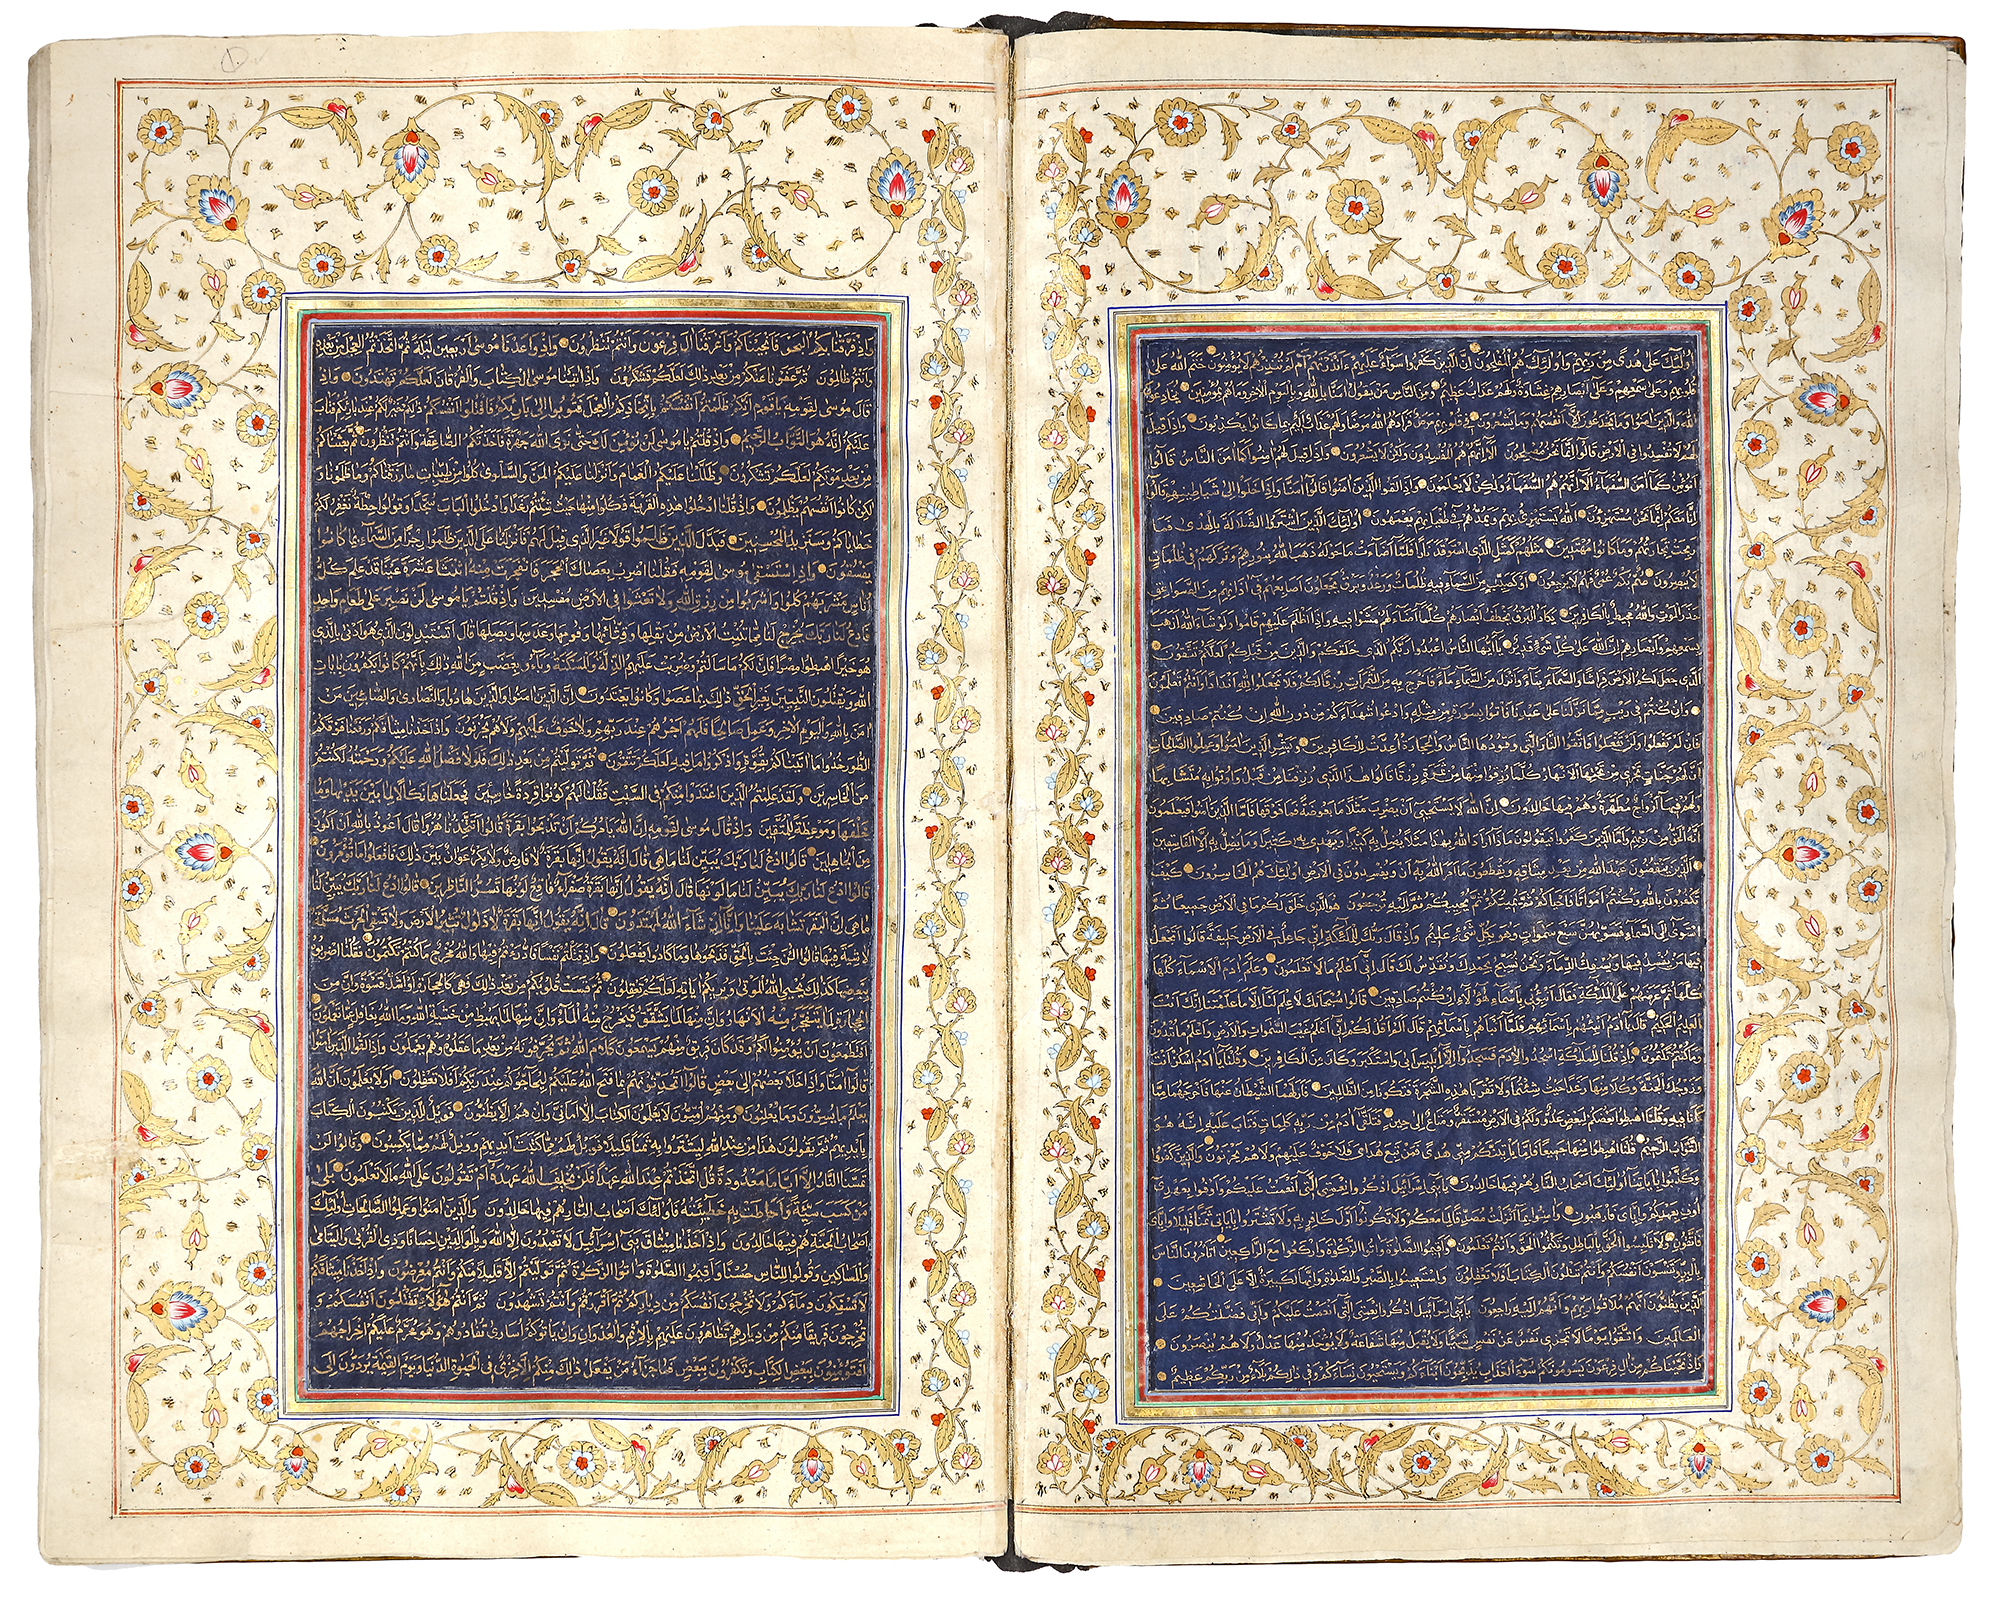 AN ILLUMINATED QURAN, PERSIA, LATE 19TH-EARLY 20TH CENTURY - Image 14 of 27